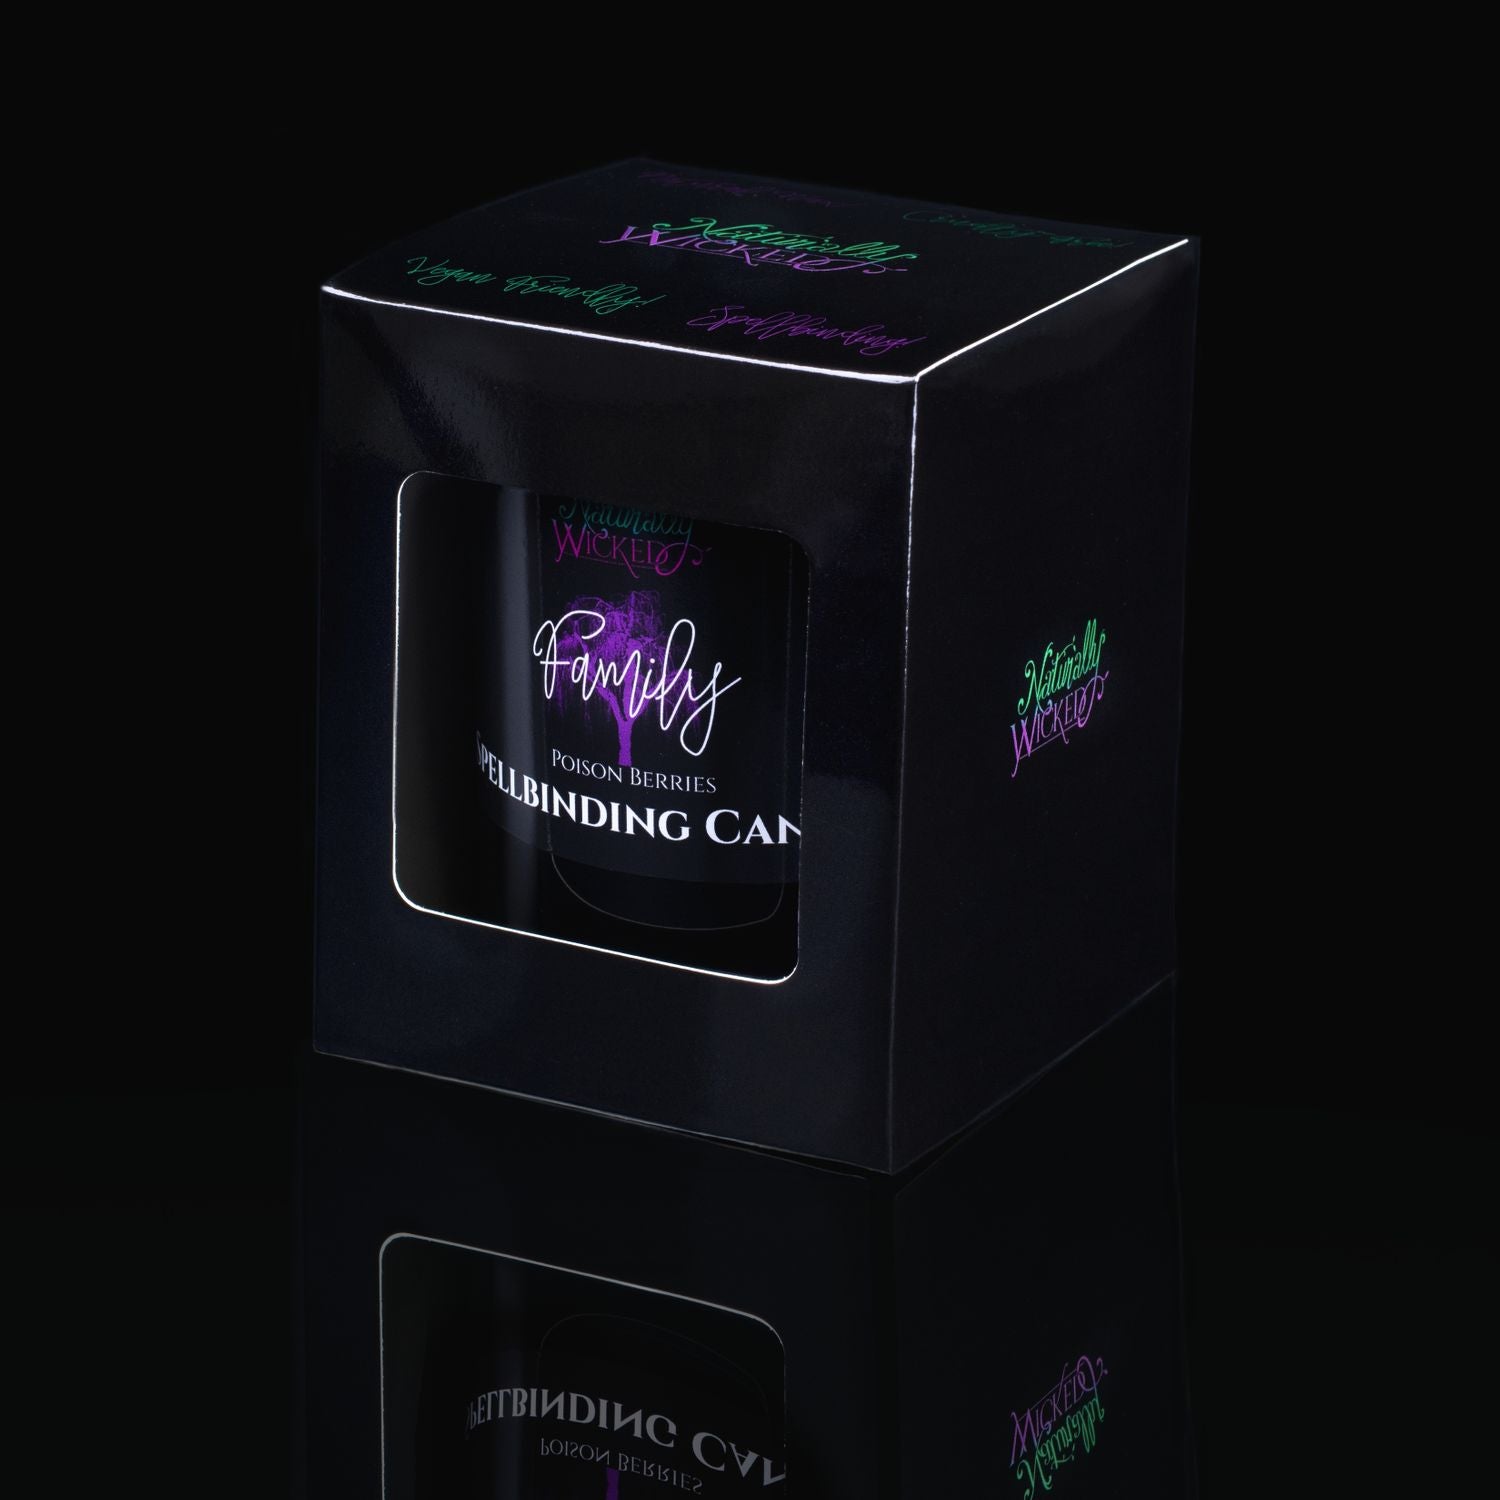 The Perfect Spell Candle To Show The Family How Much You Care. Naturally Wicked Spellbinding Family Candle Displayed In A Sleek Black Gloss Gift Box. The Candle Features Plant-Based Smooth Purple Wax, A Wood Wick And A Beautiful Purple Agate Crystal.